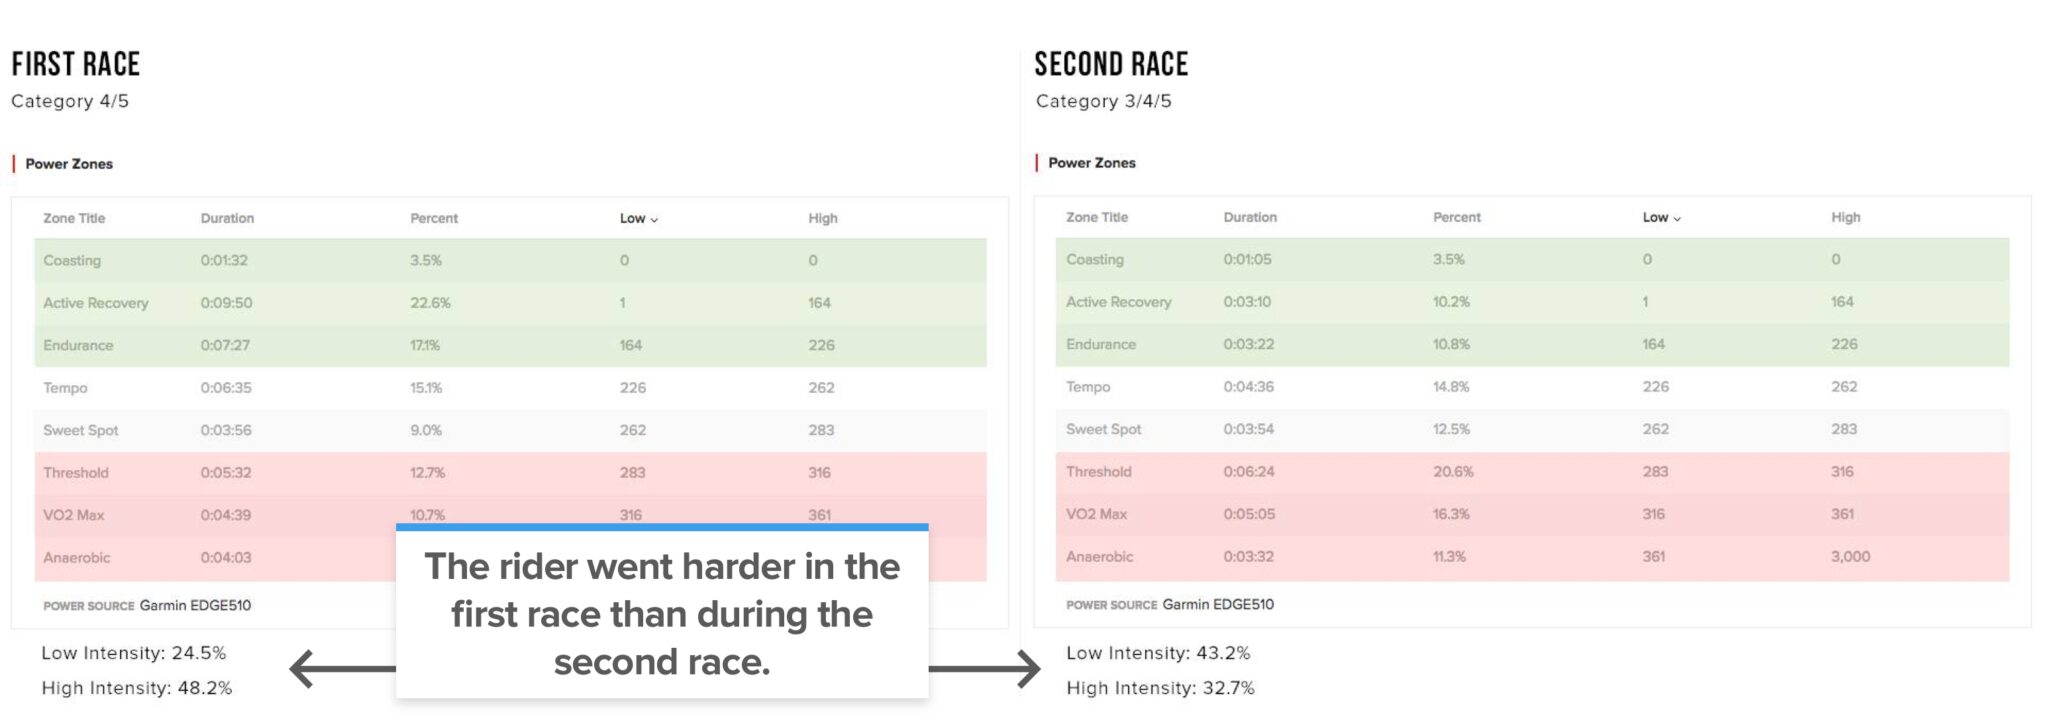 Ride analysis comparison between two races